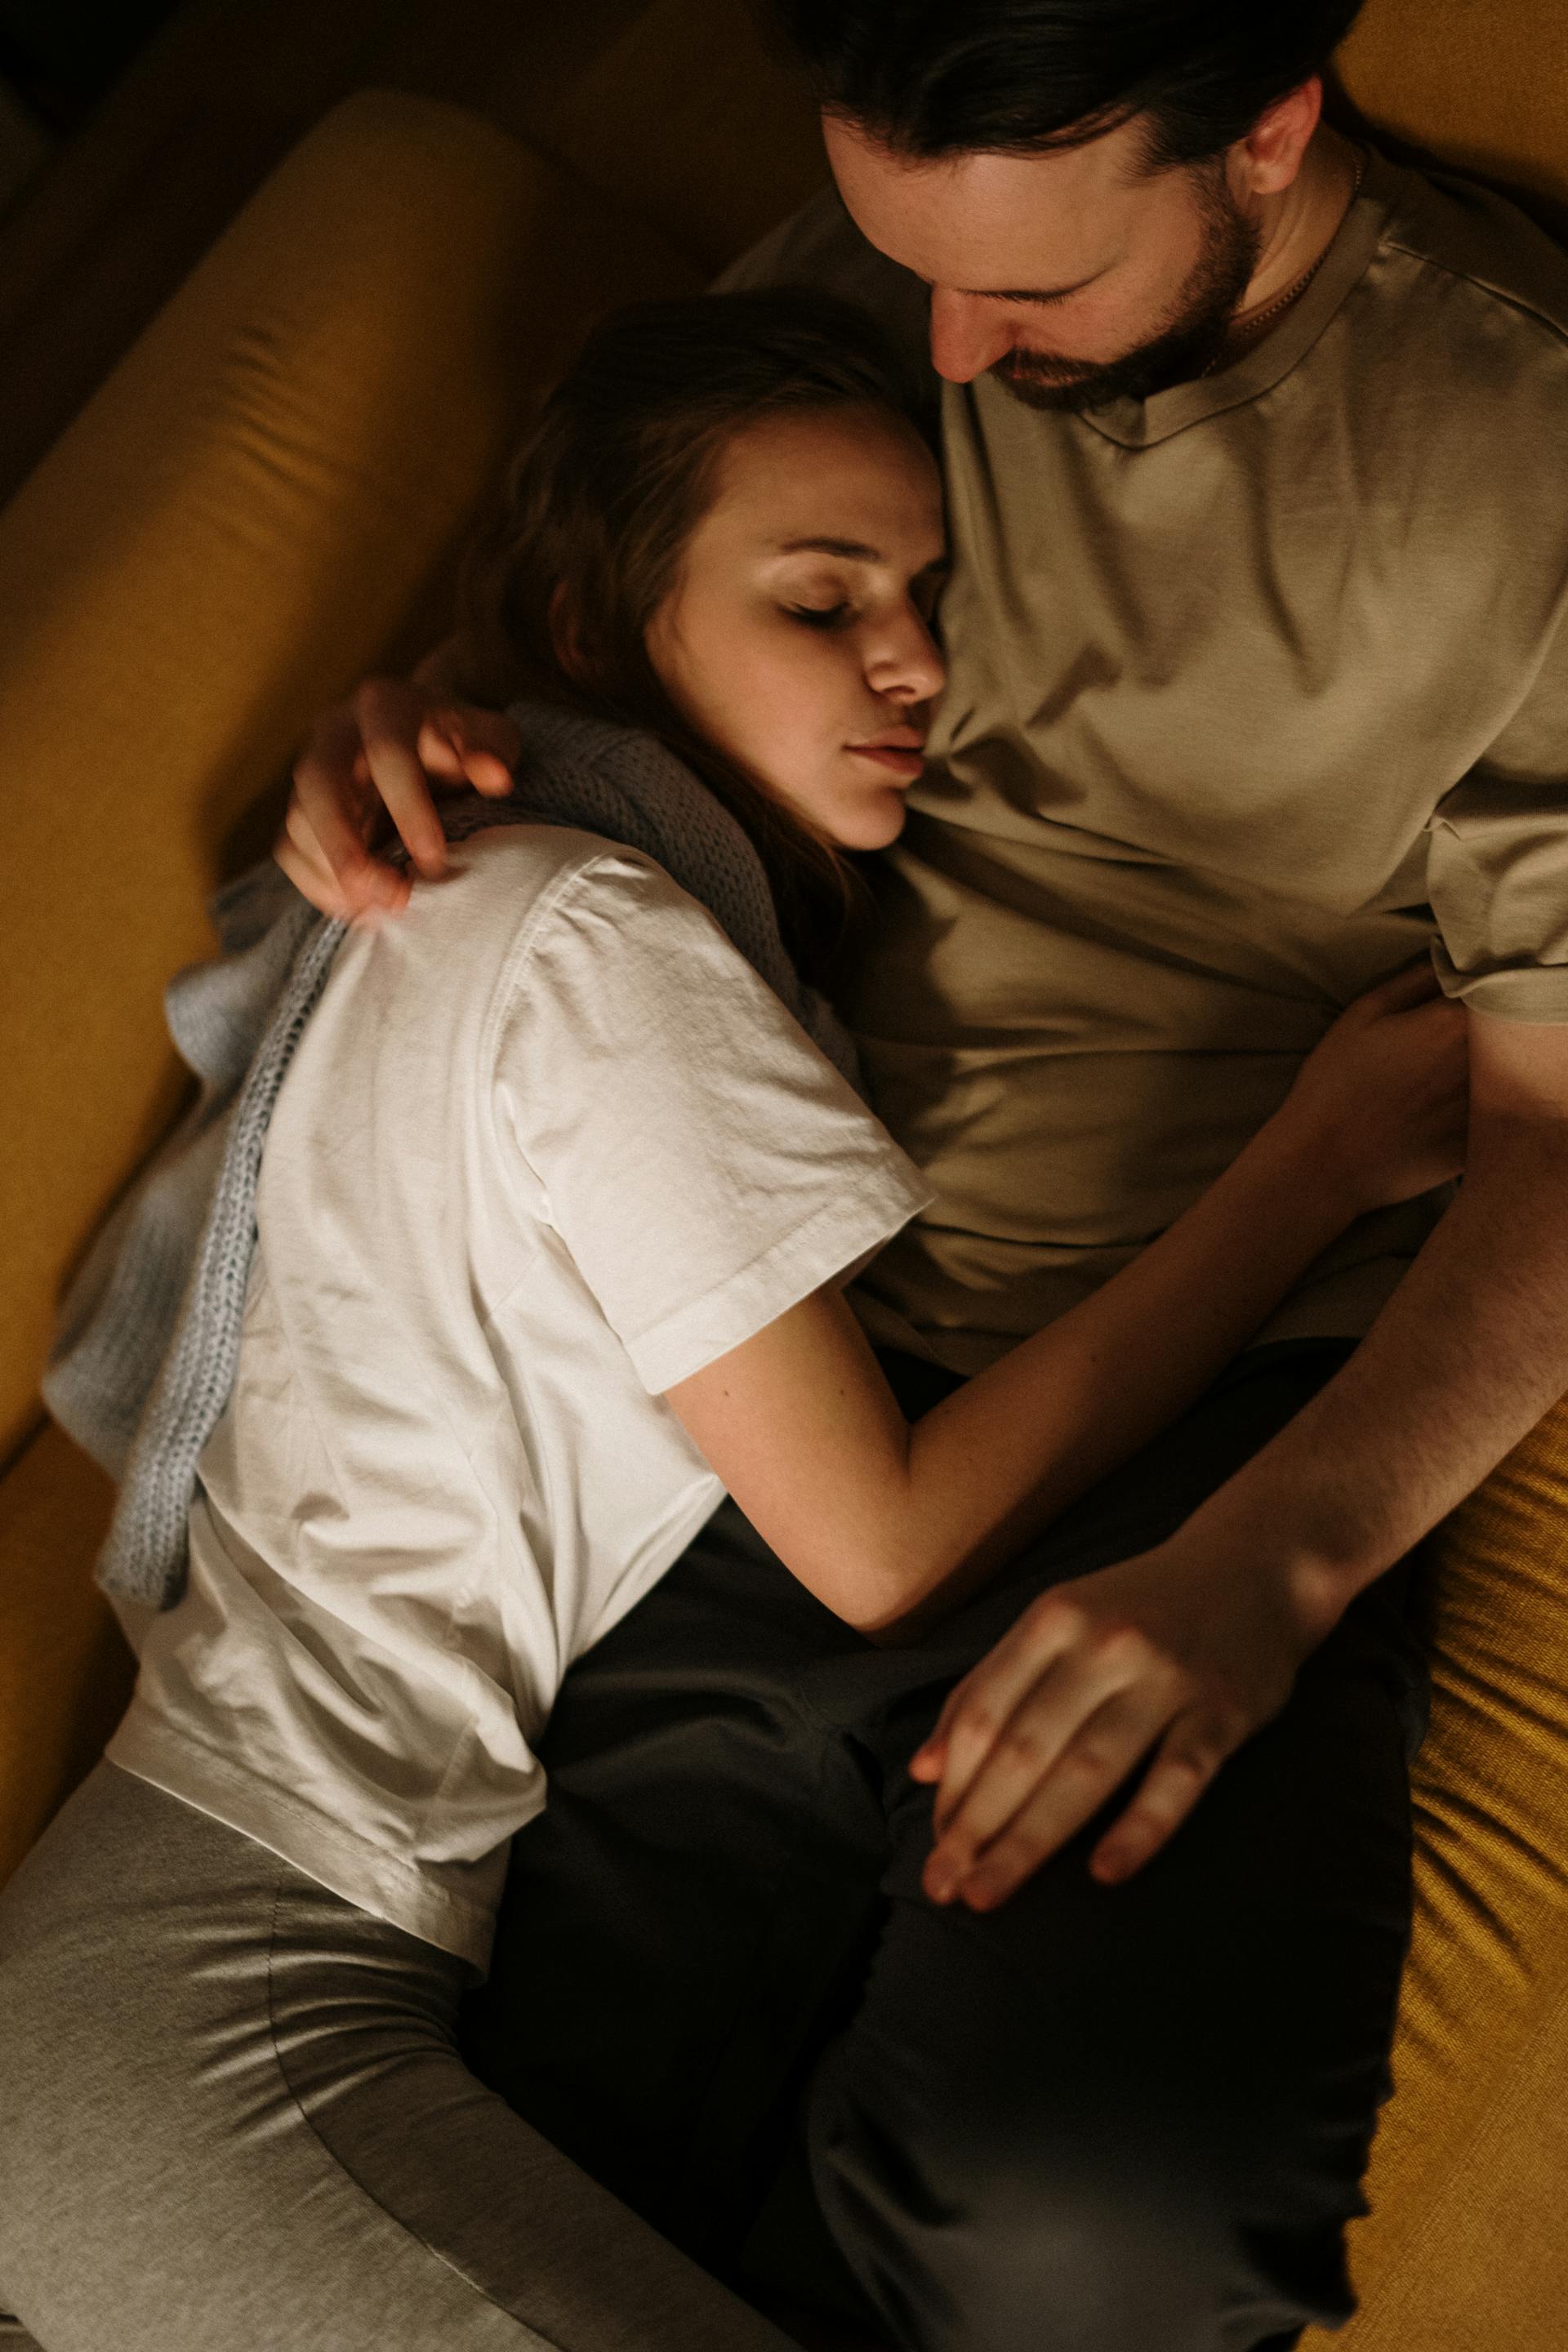 A couple laying on a couch | Source: Pexels